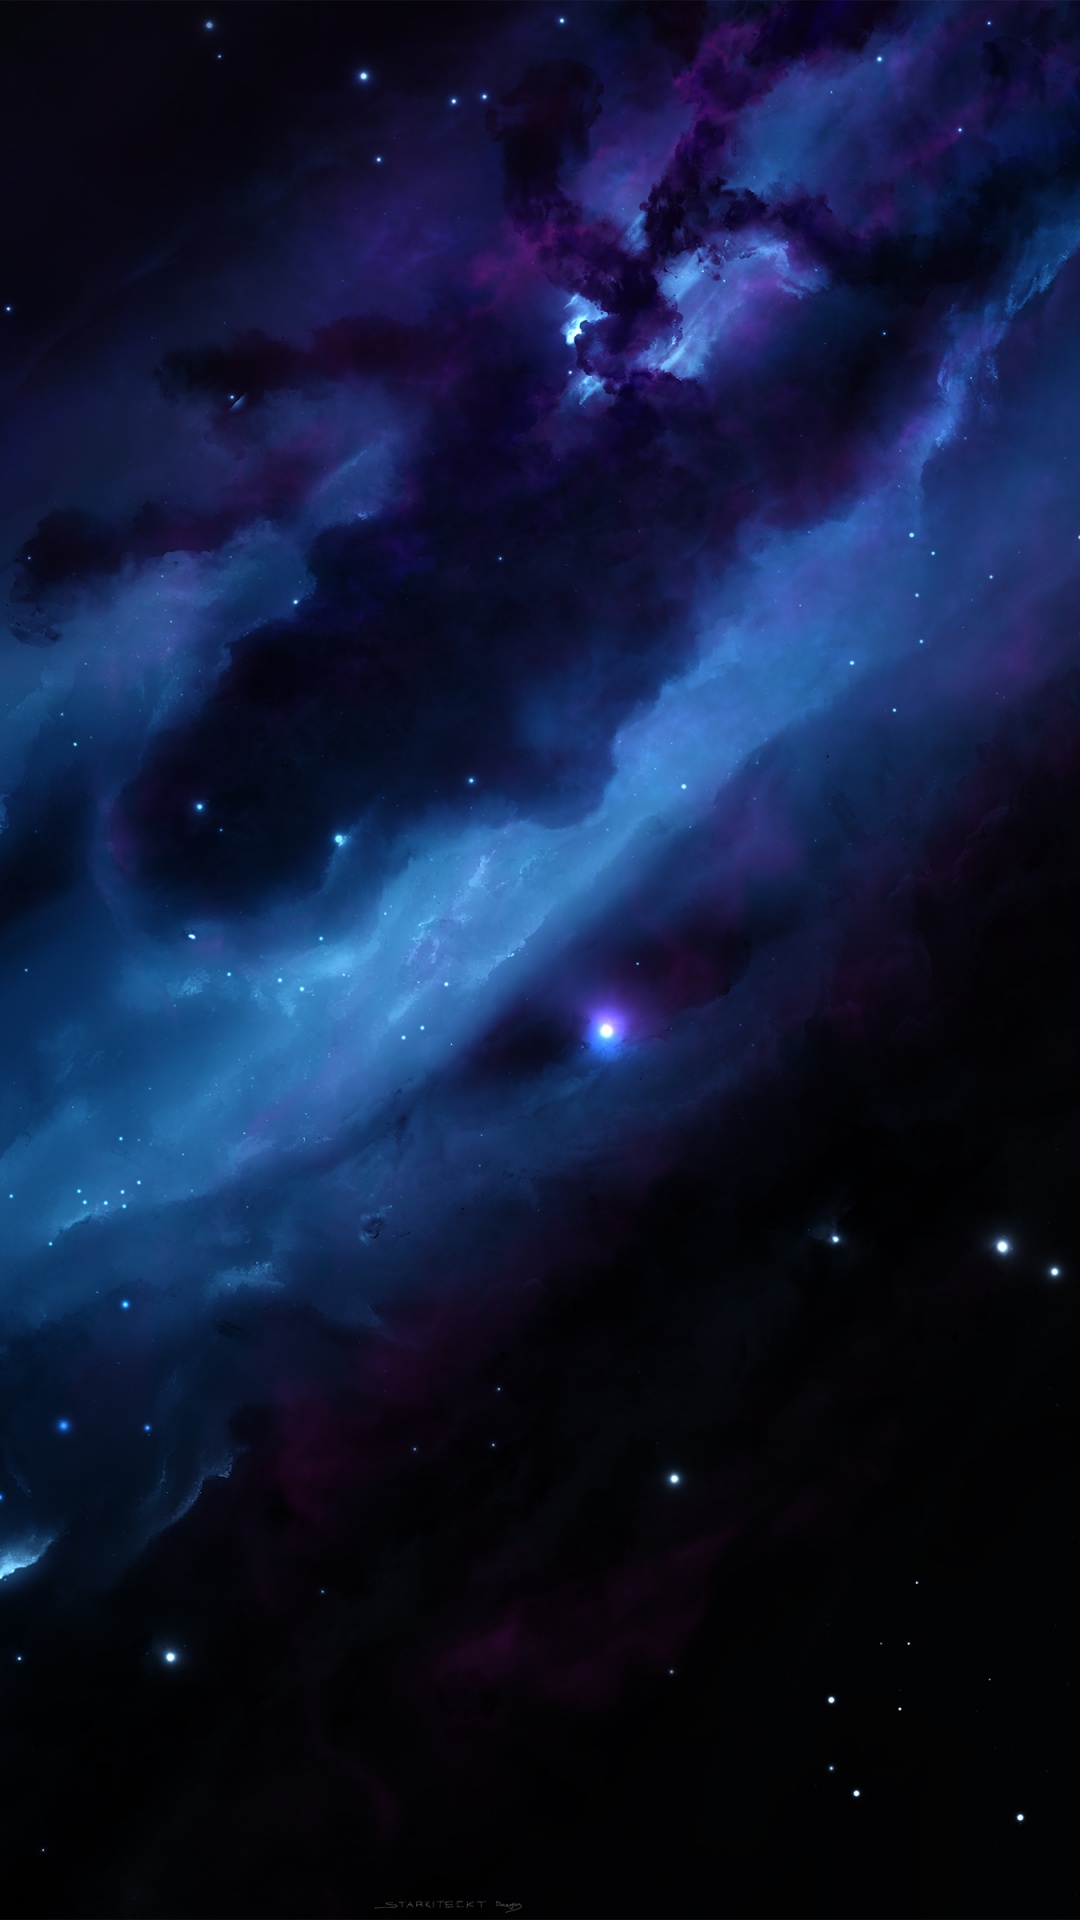 Purple and White Galaxy Illustration. Wallpaper in 1080x1920 Resolution